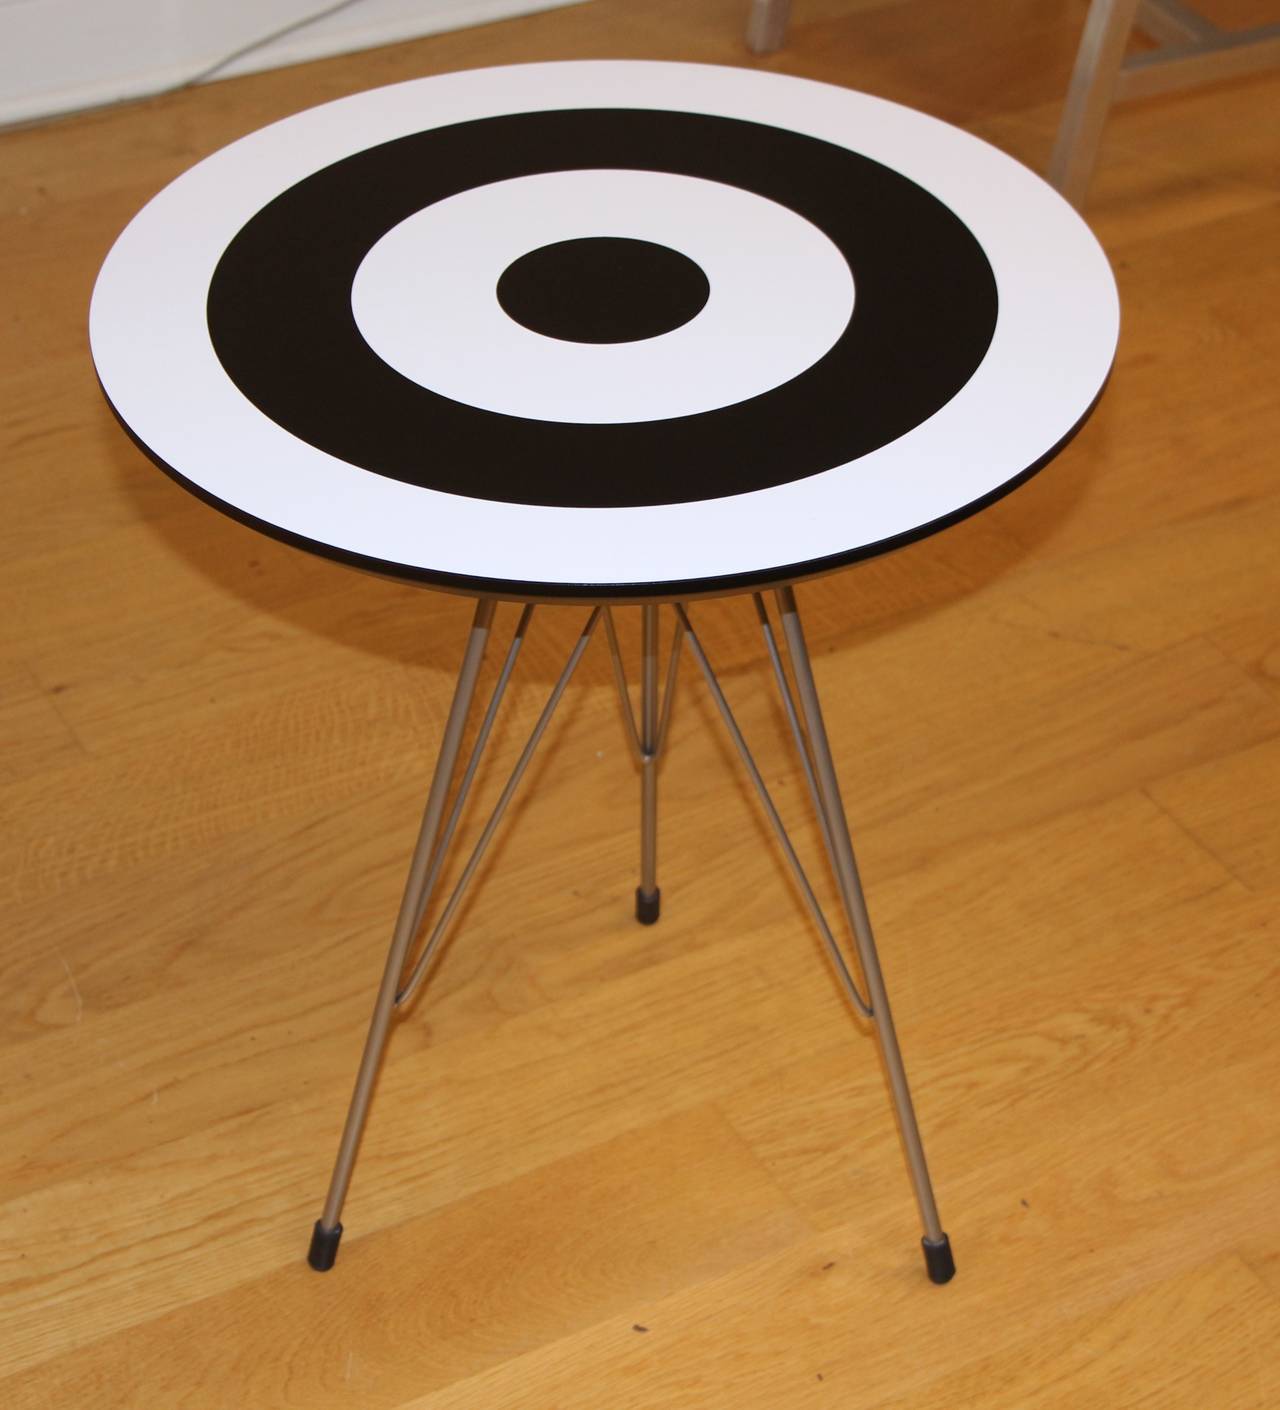 We were lucky to find this somewhat rare table designed by Douglas Coupland. It is in never used, as new condition, with the plastic opened for photography. The hockey night in Canada table was designed by Douglas Coupland for pure design and made